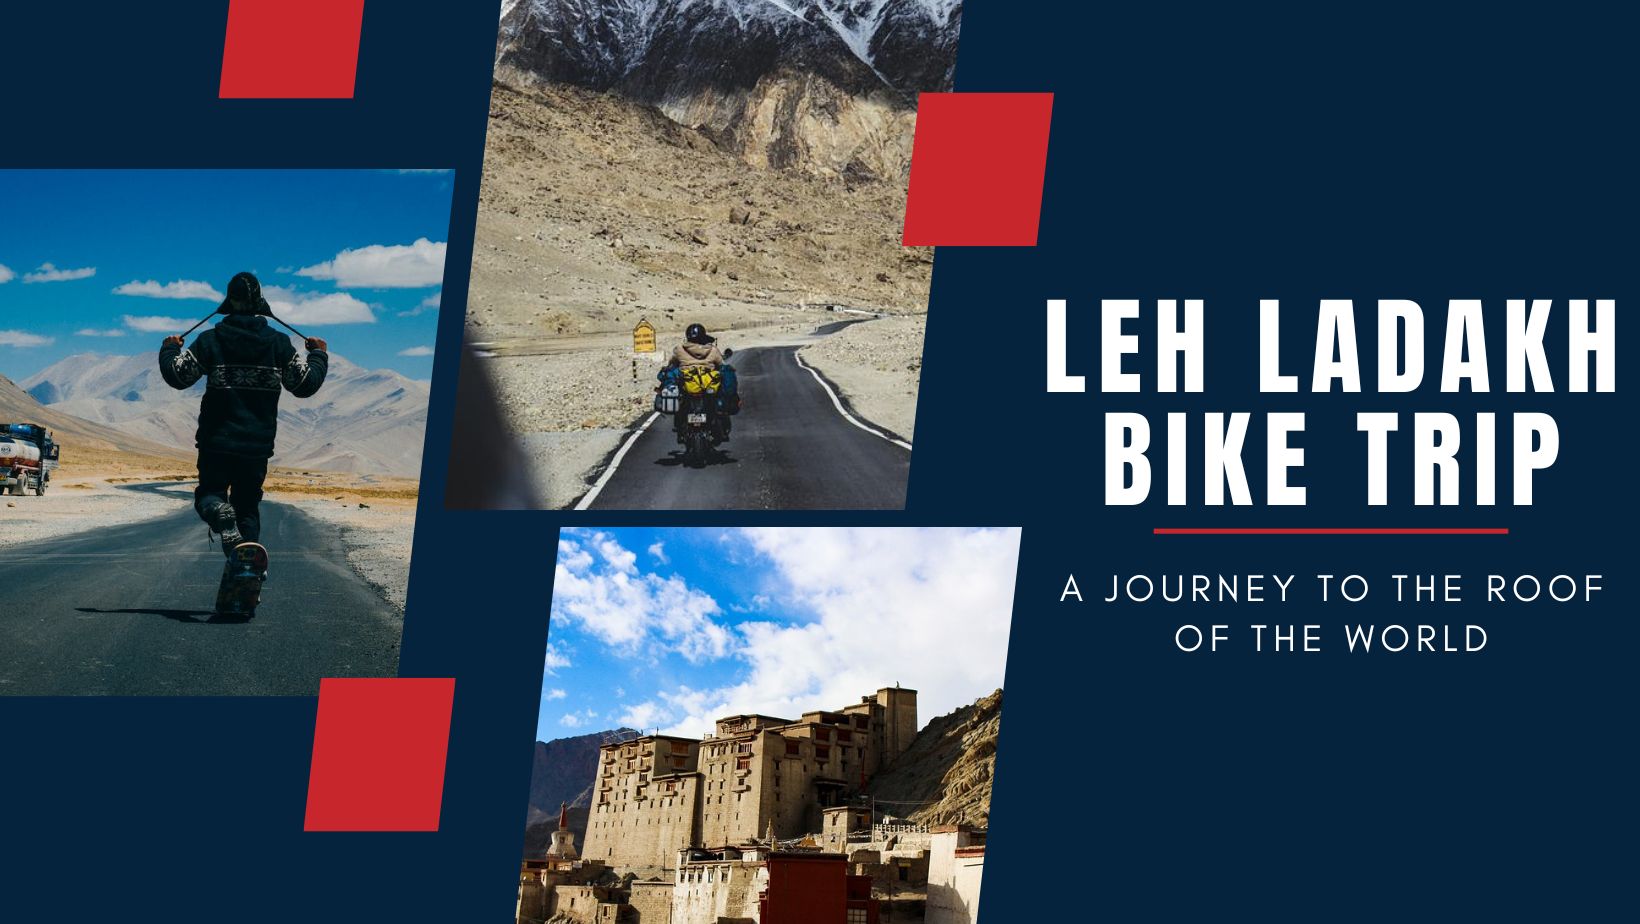 Leh Ladakh Bike Trip: A Journey to the Roof of the World